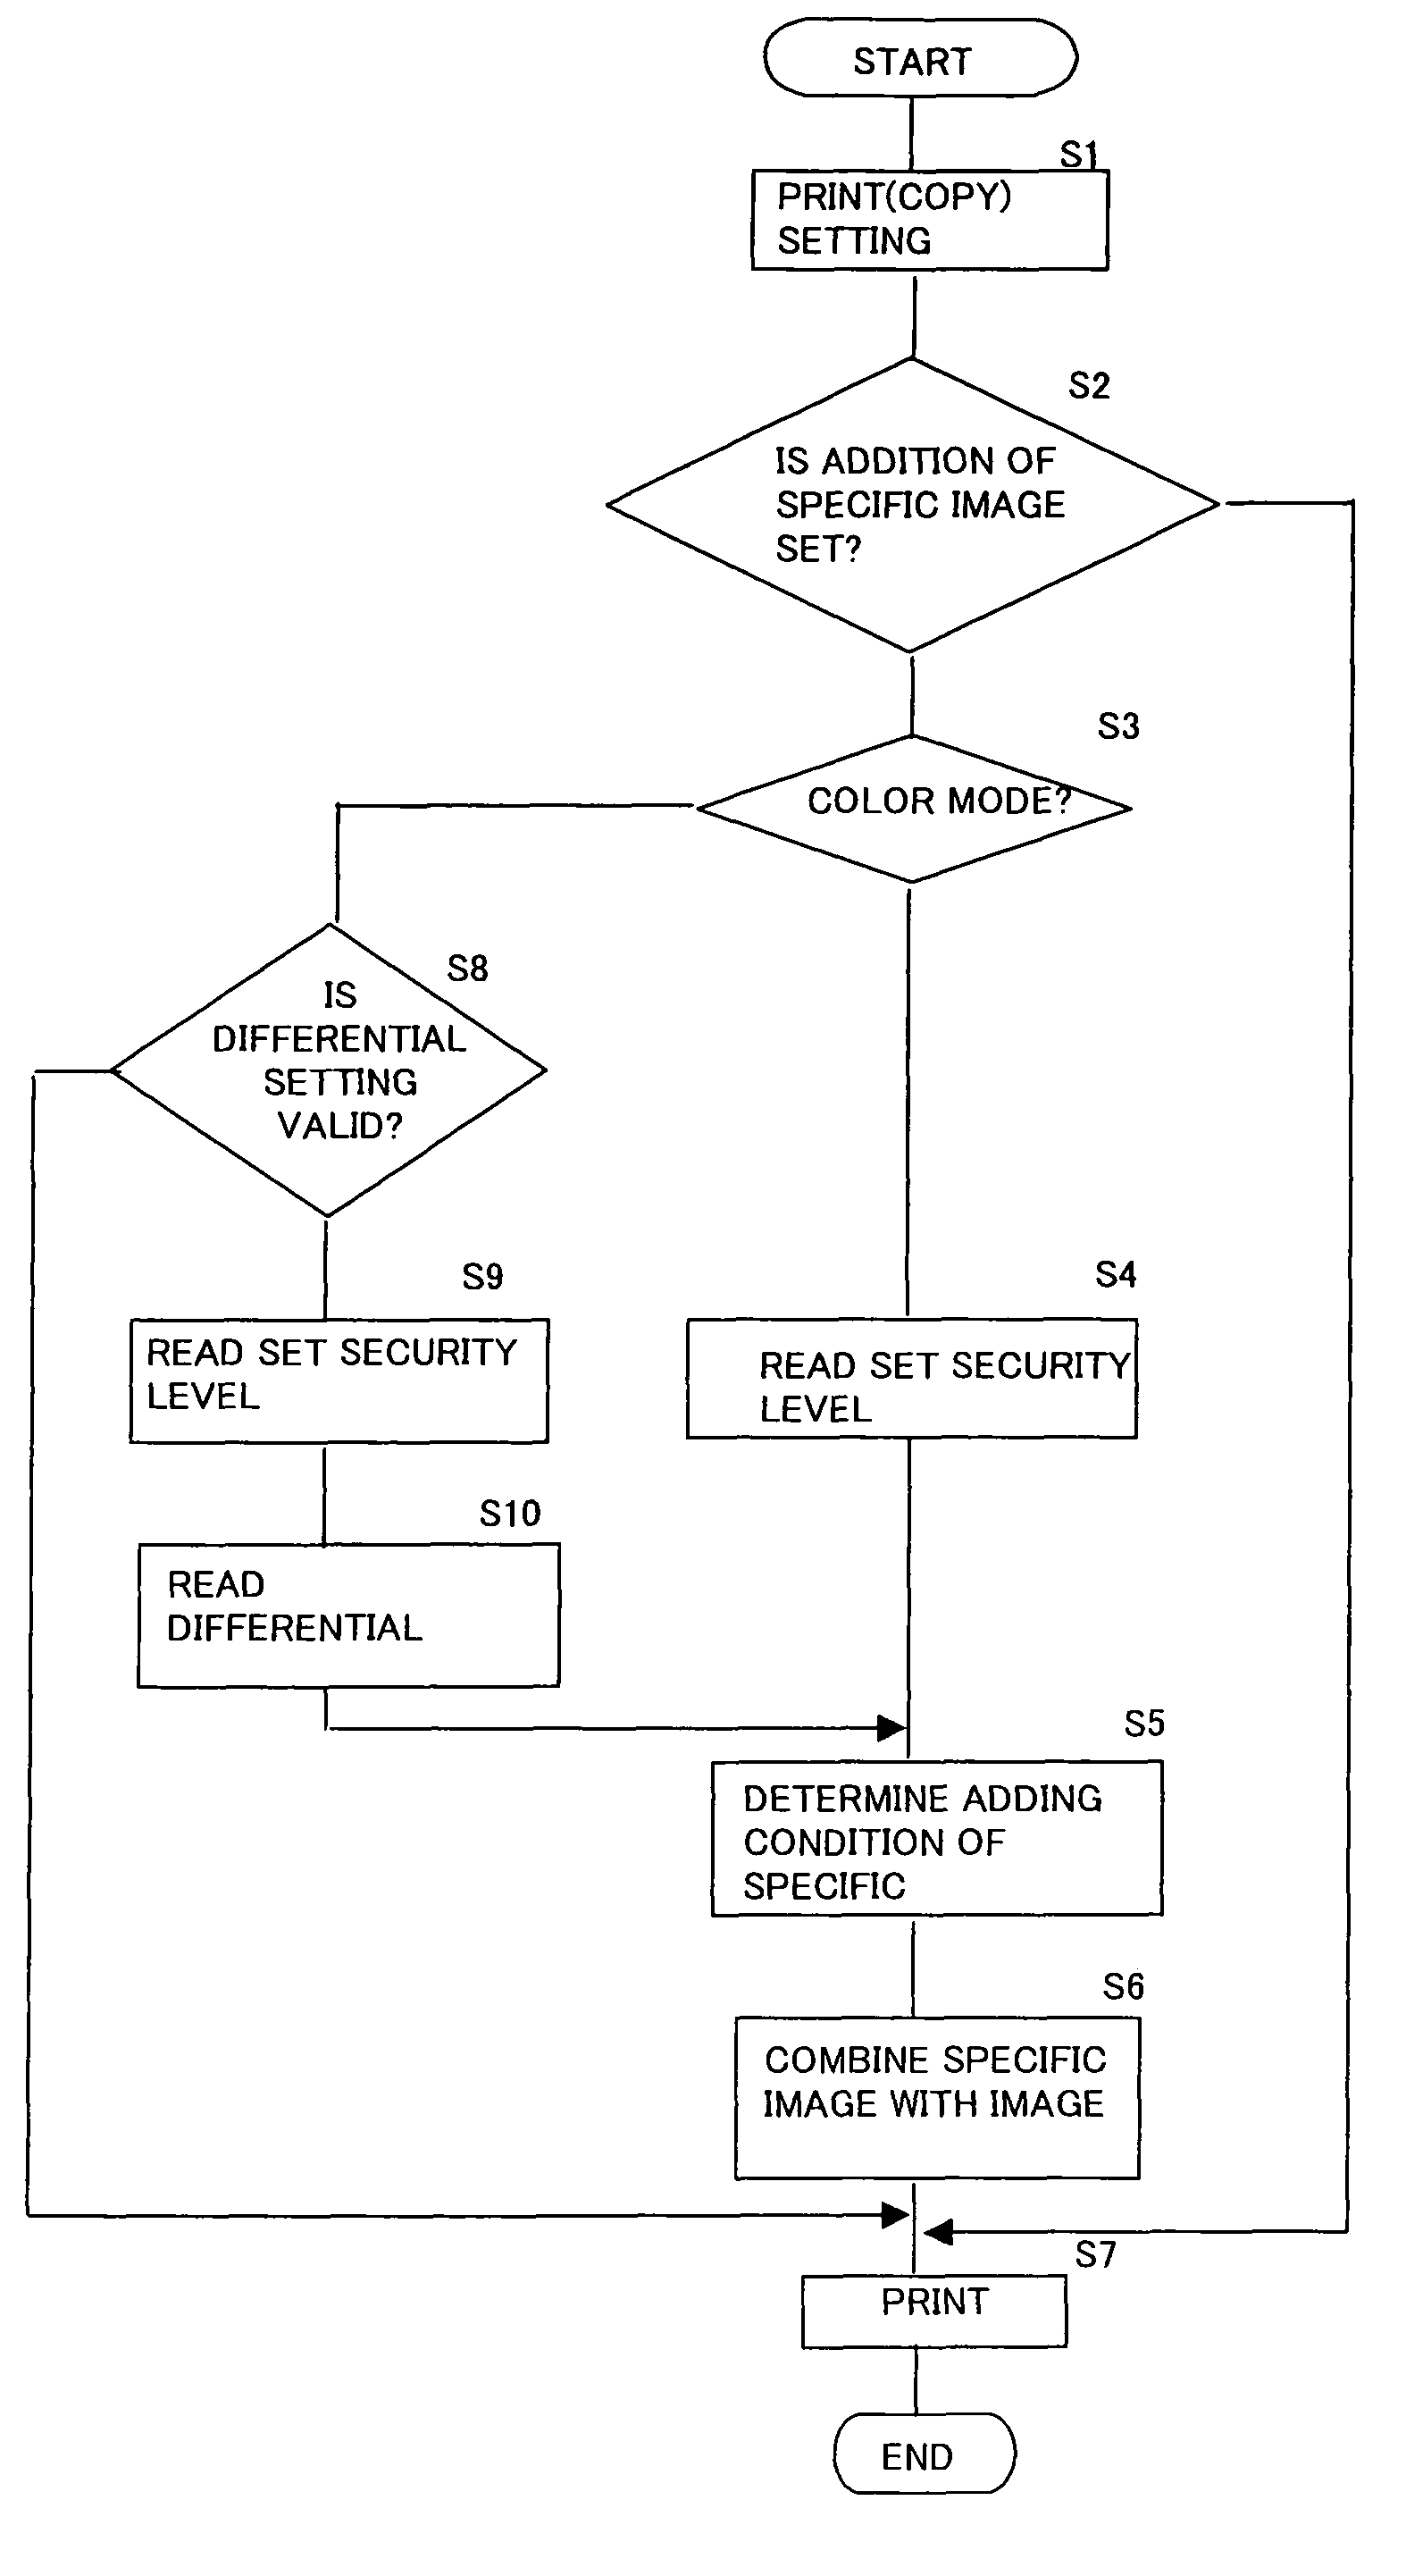 Image processing apparatus for adding different specific images to image data in color and black-and-white modes